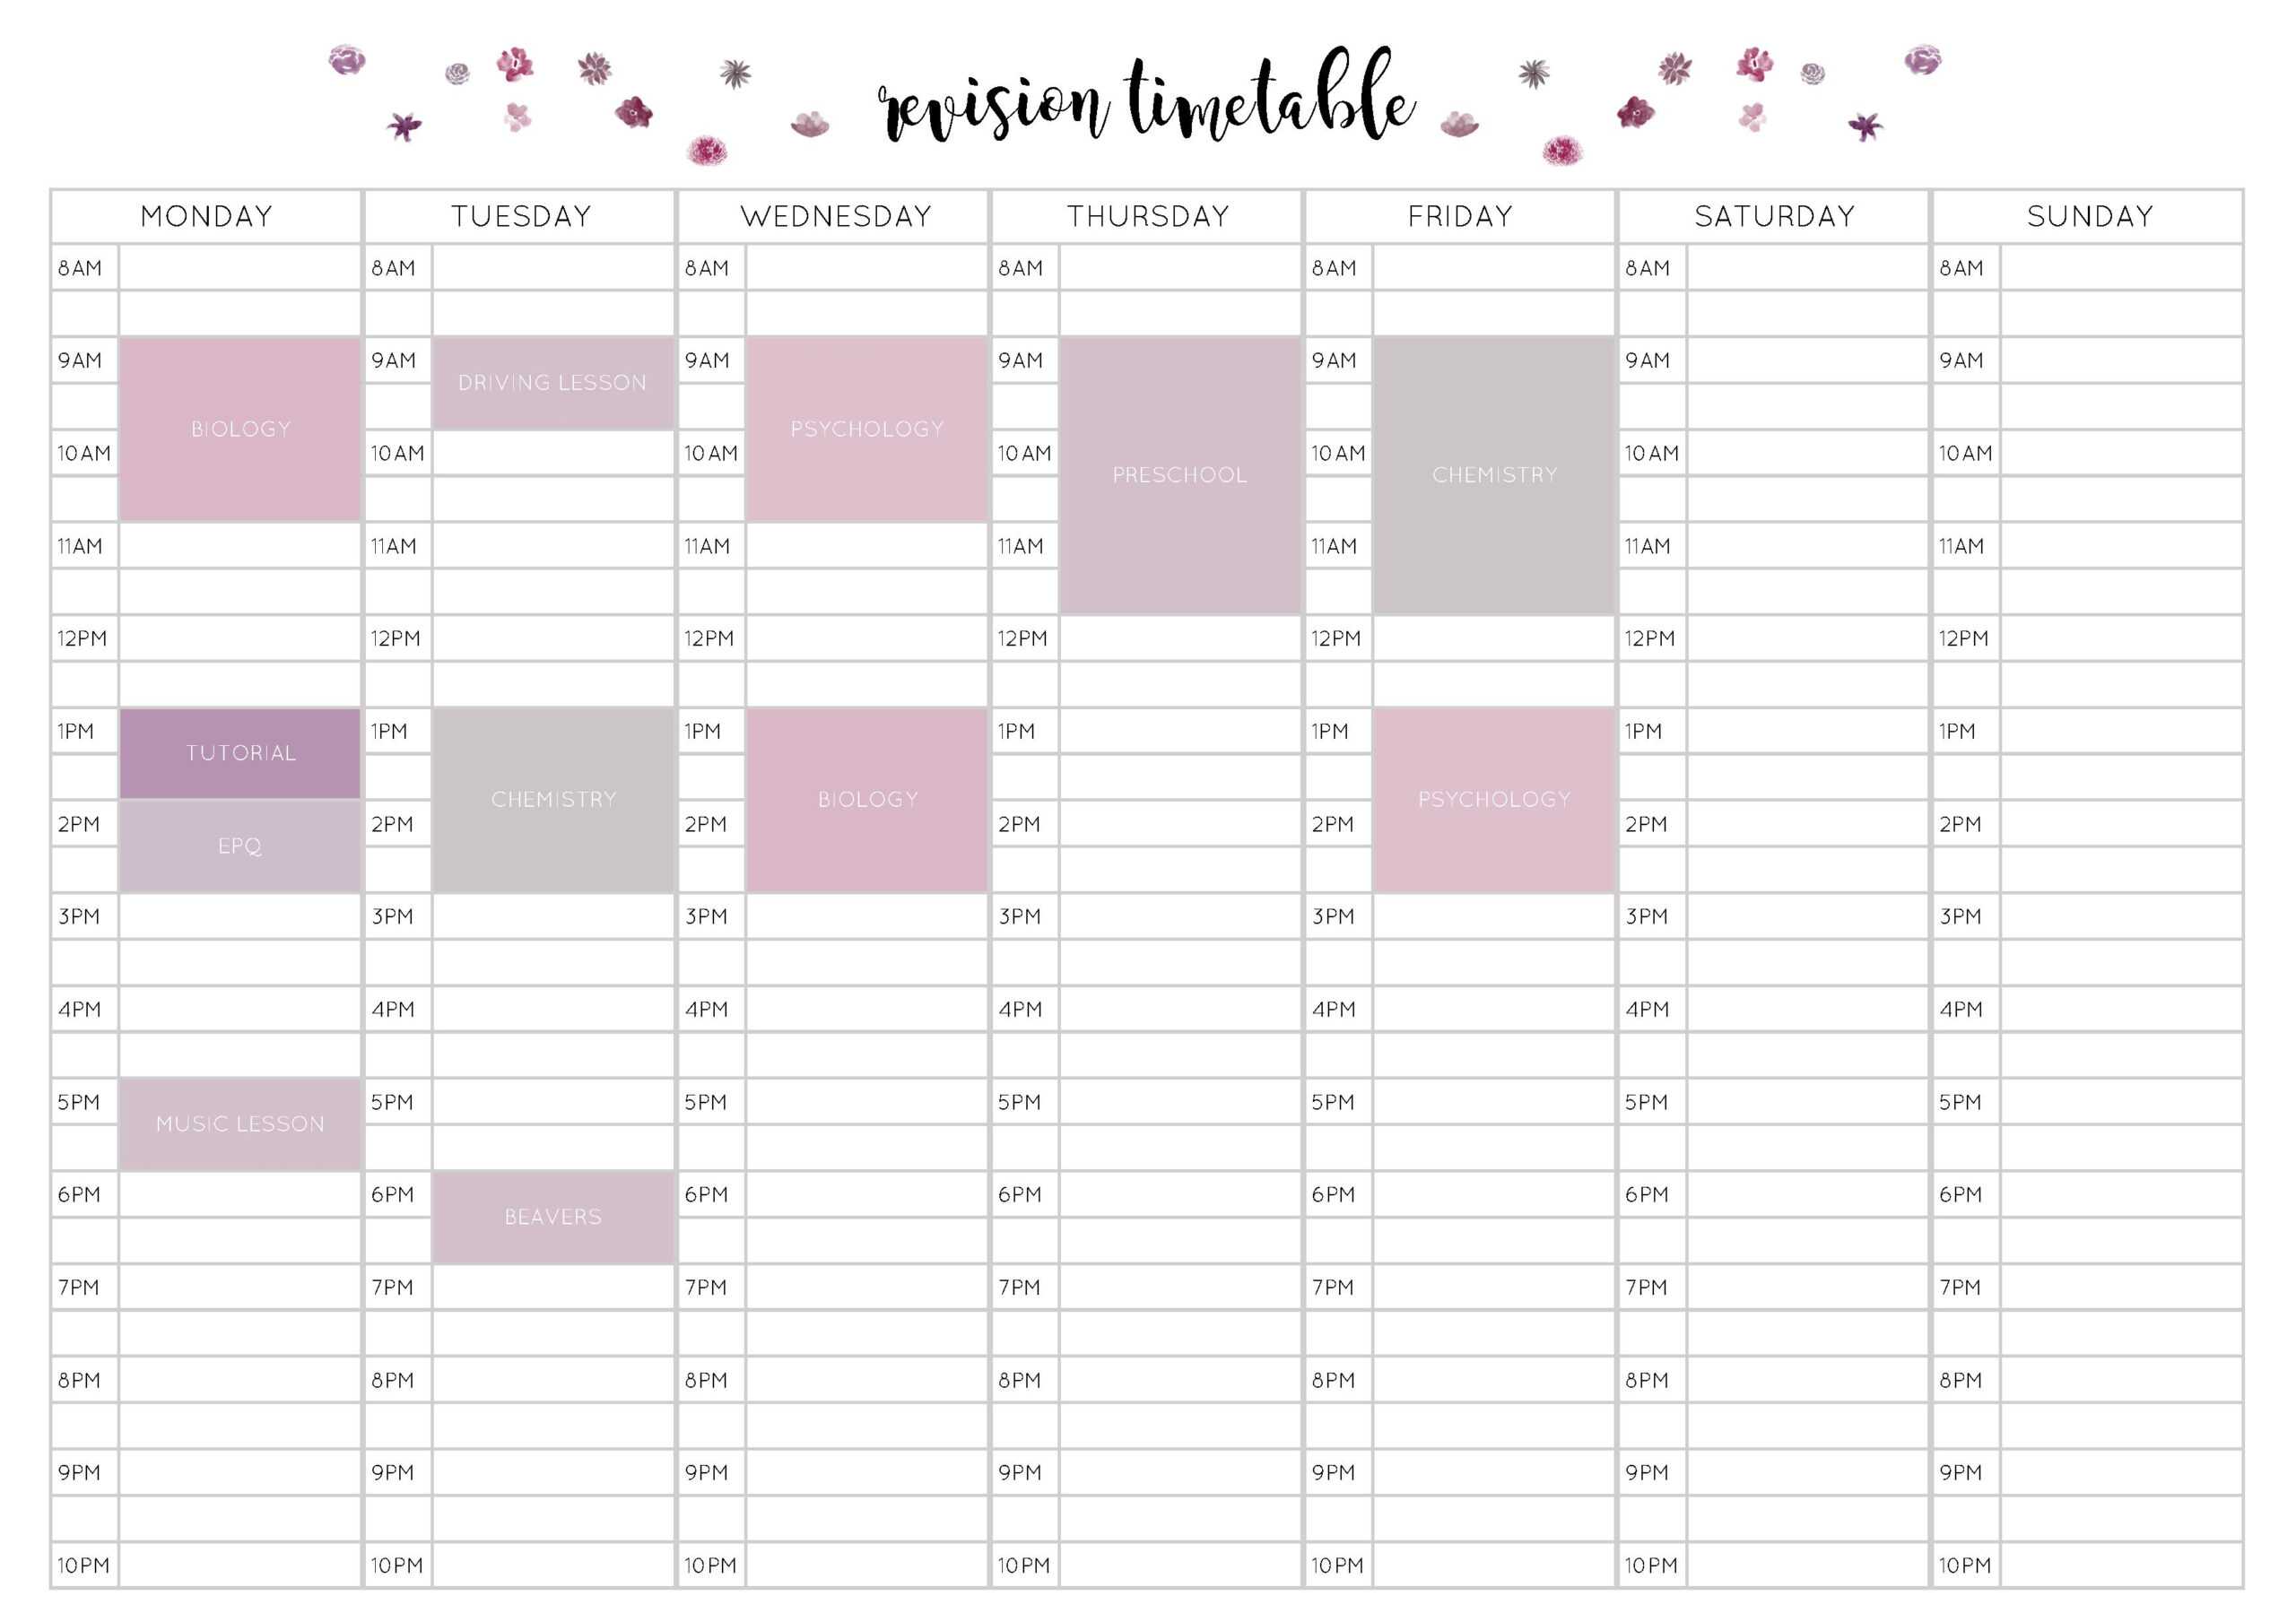 Free Revision Timetable Printable – Emily Studies In Blank Revision Timetable Template